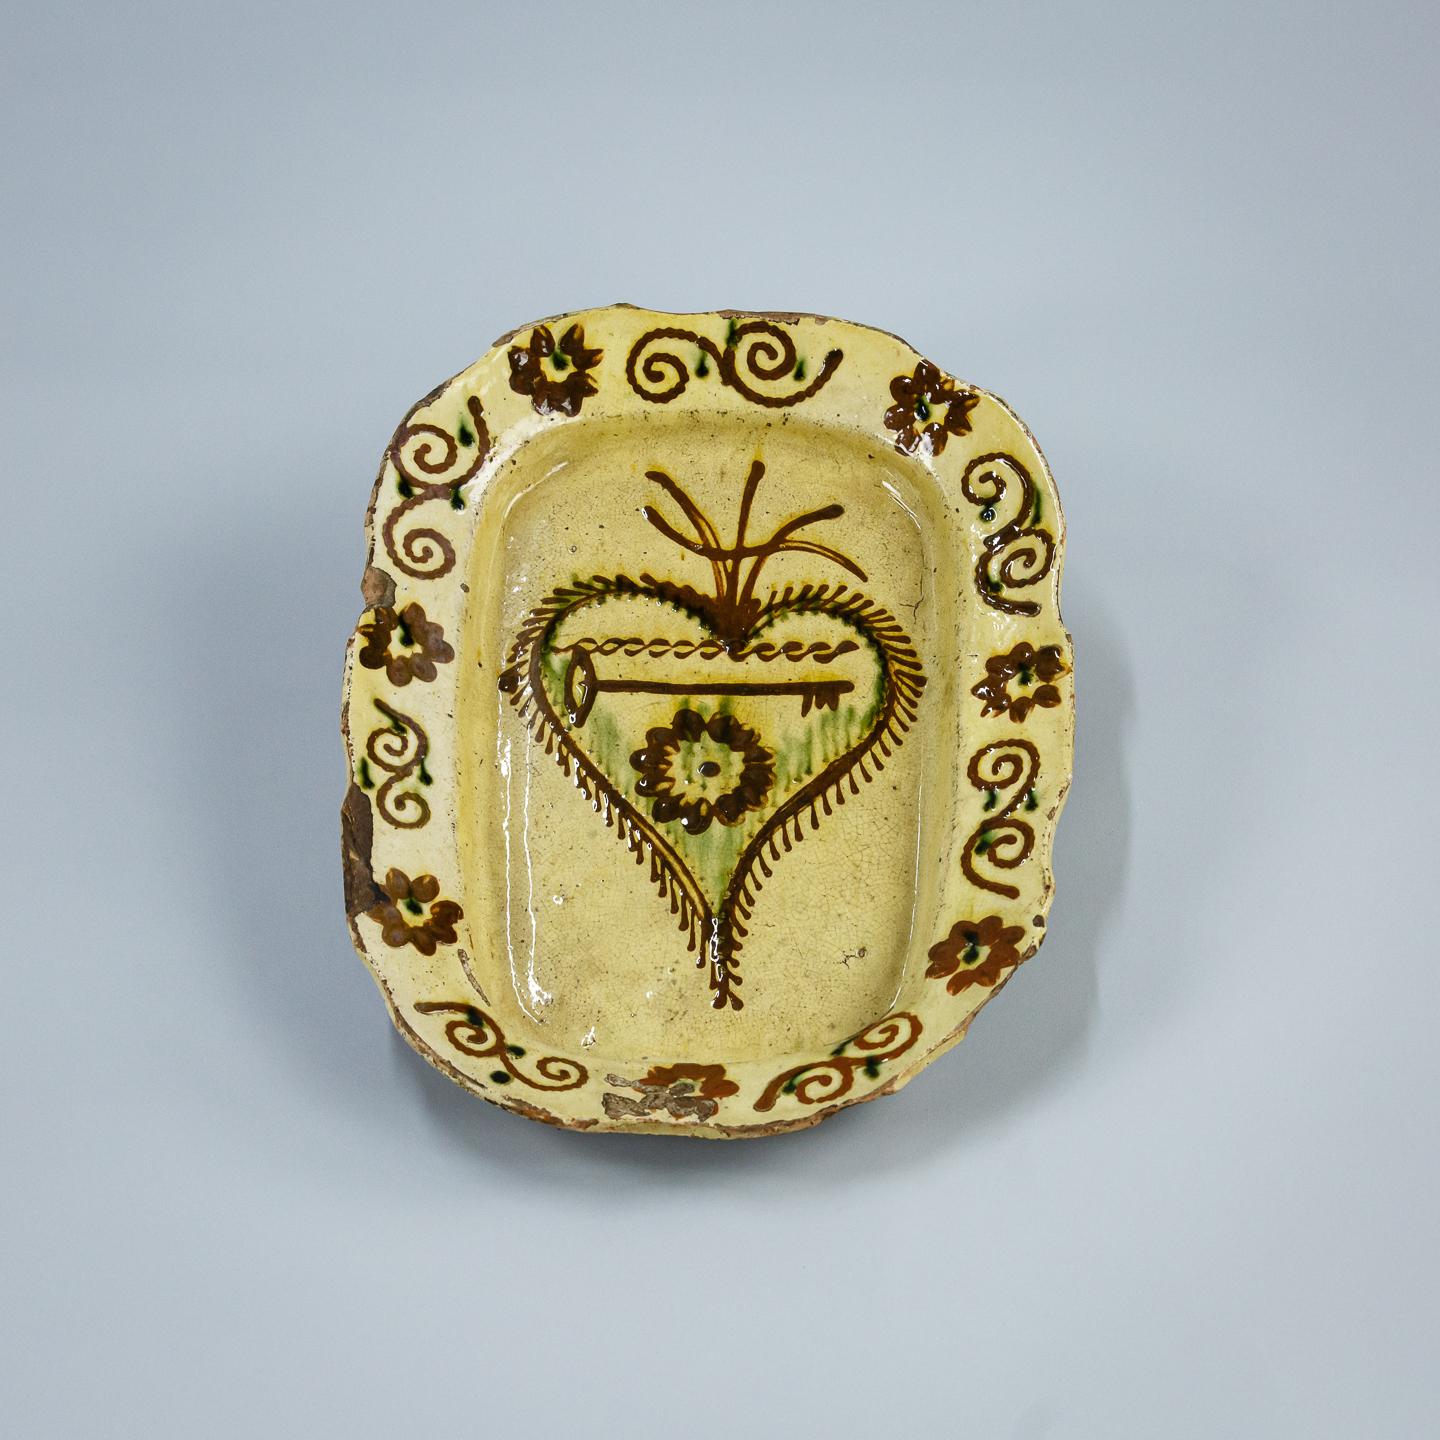 Slipware marriage plate. decorated with the key to unlock the heart of love. France Circa 1780. 
Probably unique, made specifically for the happy couple as a memory of their wedding day.
Good condition, with some light losses to the glaze. Some